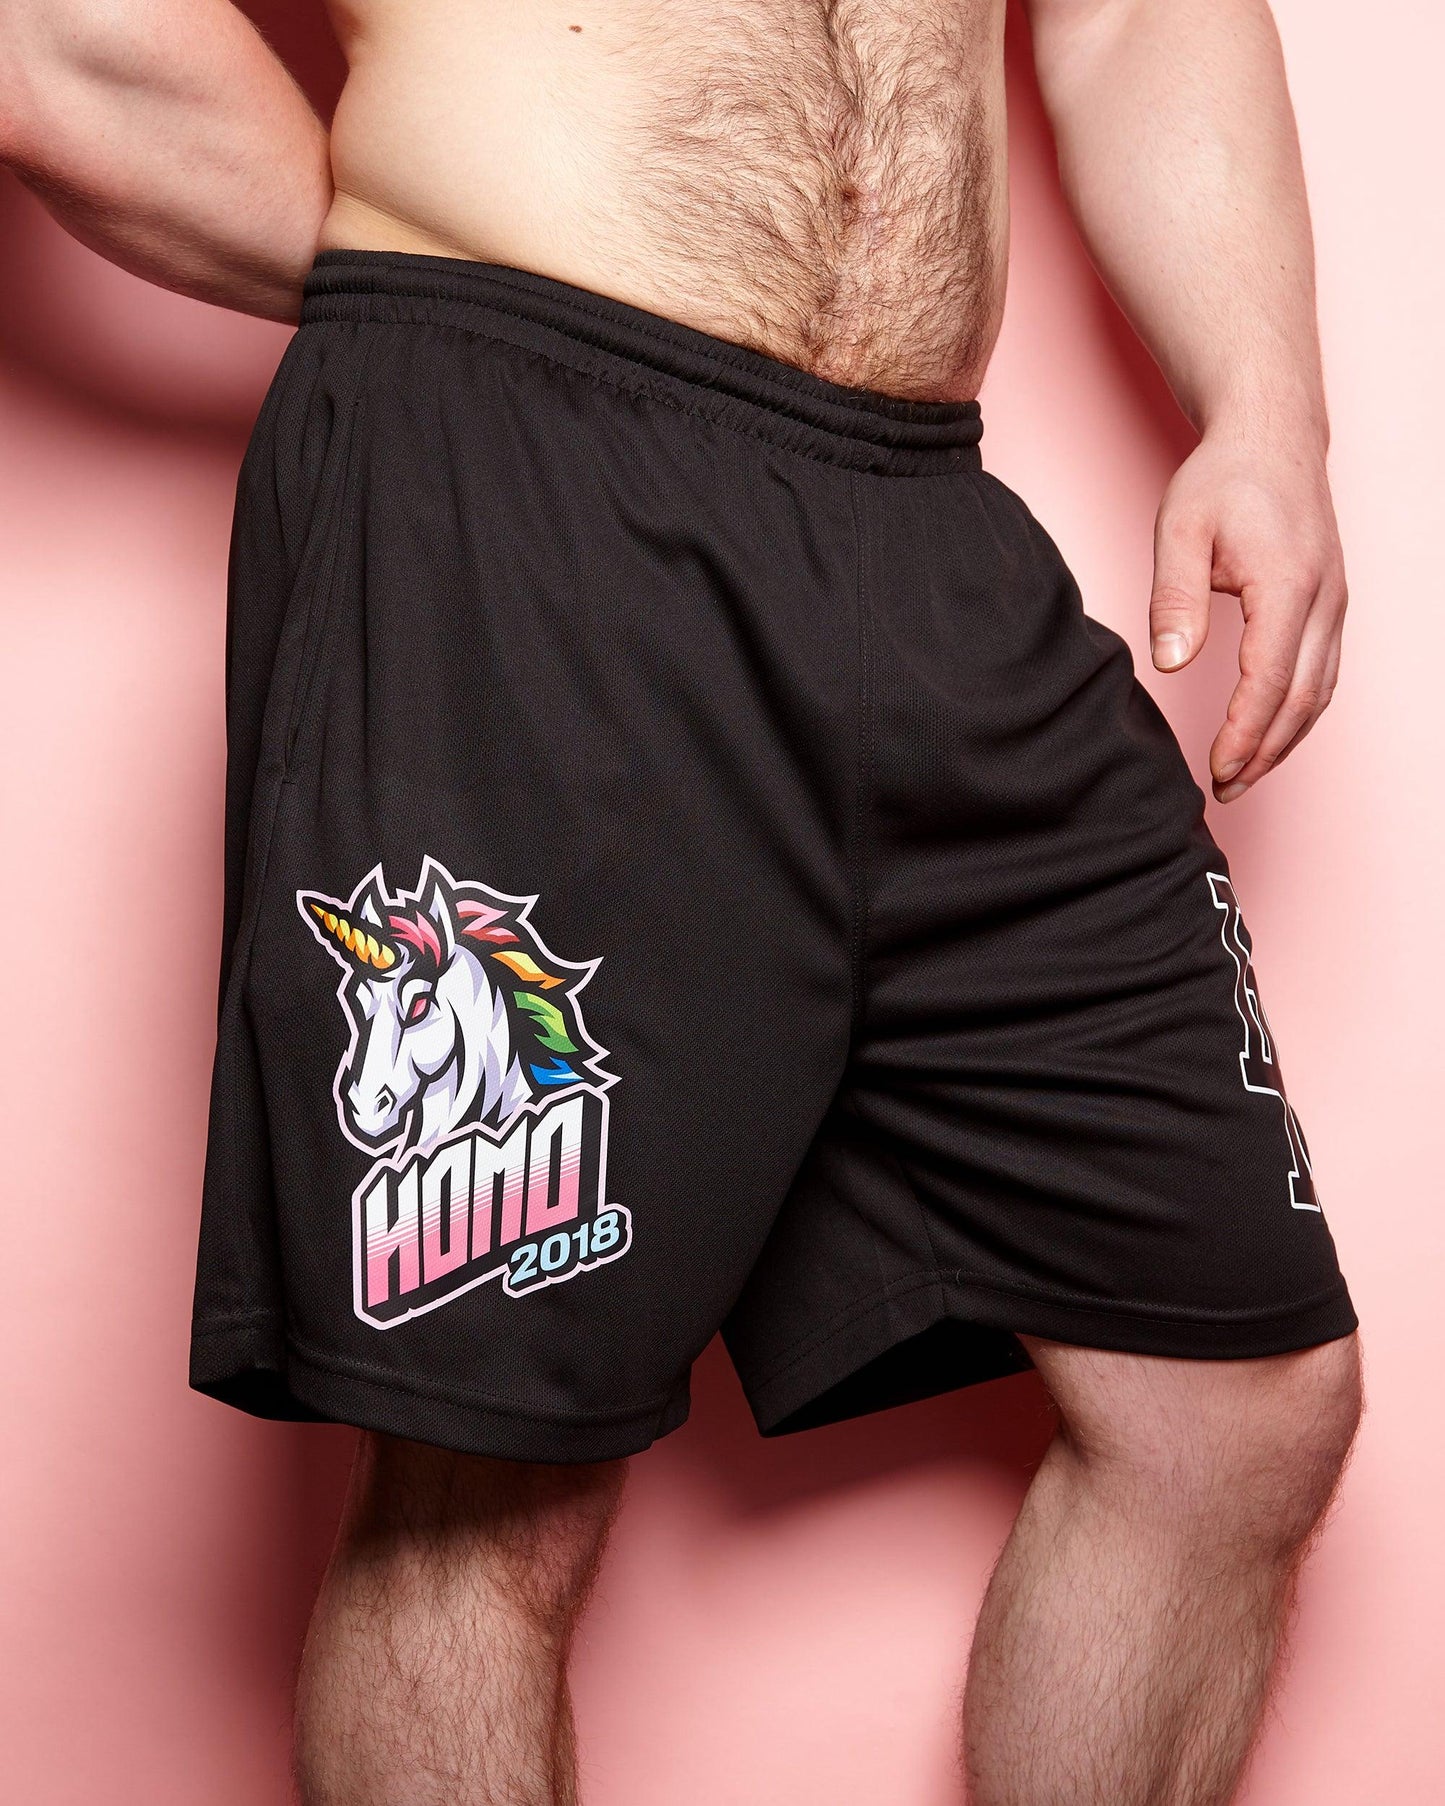 Double Pack - sporty unicorn, black - tank and basket ball shorts - Full outfit.